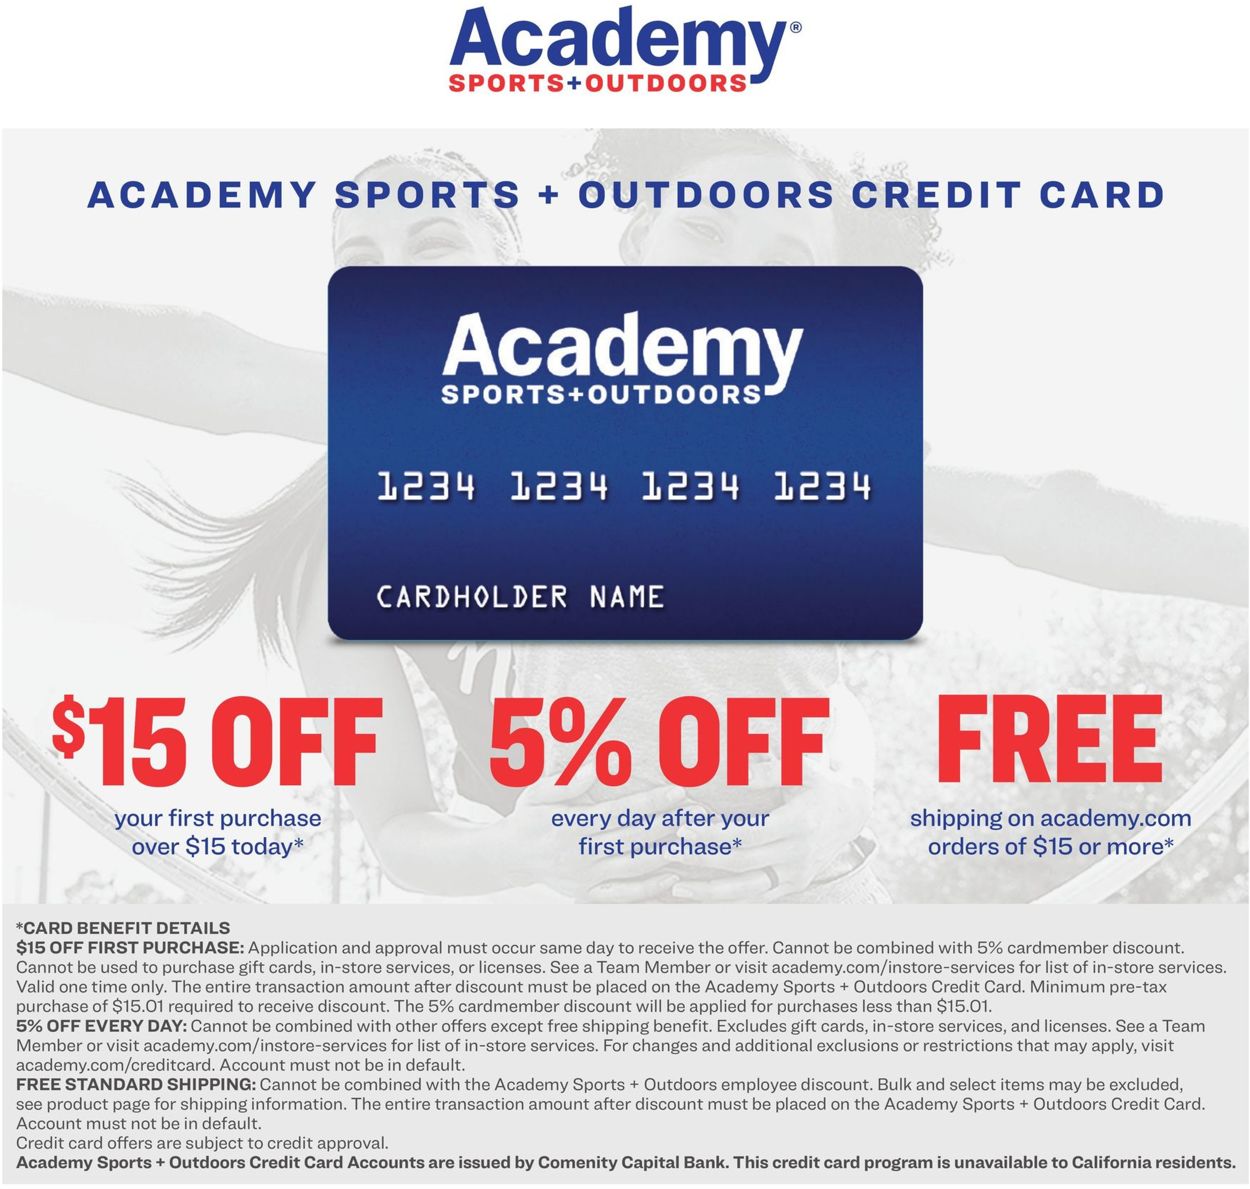 Academy Sports Ad from 12/21/2020